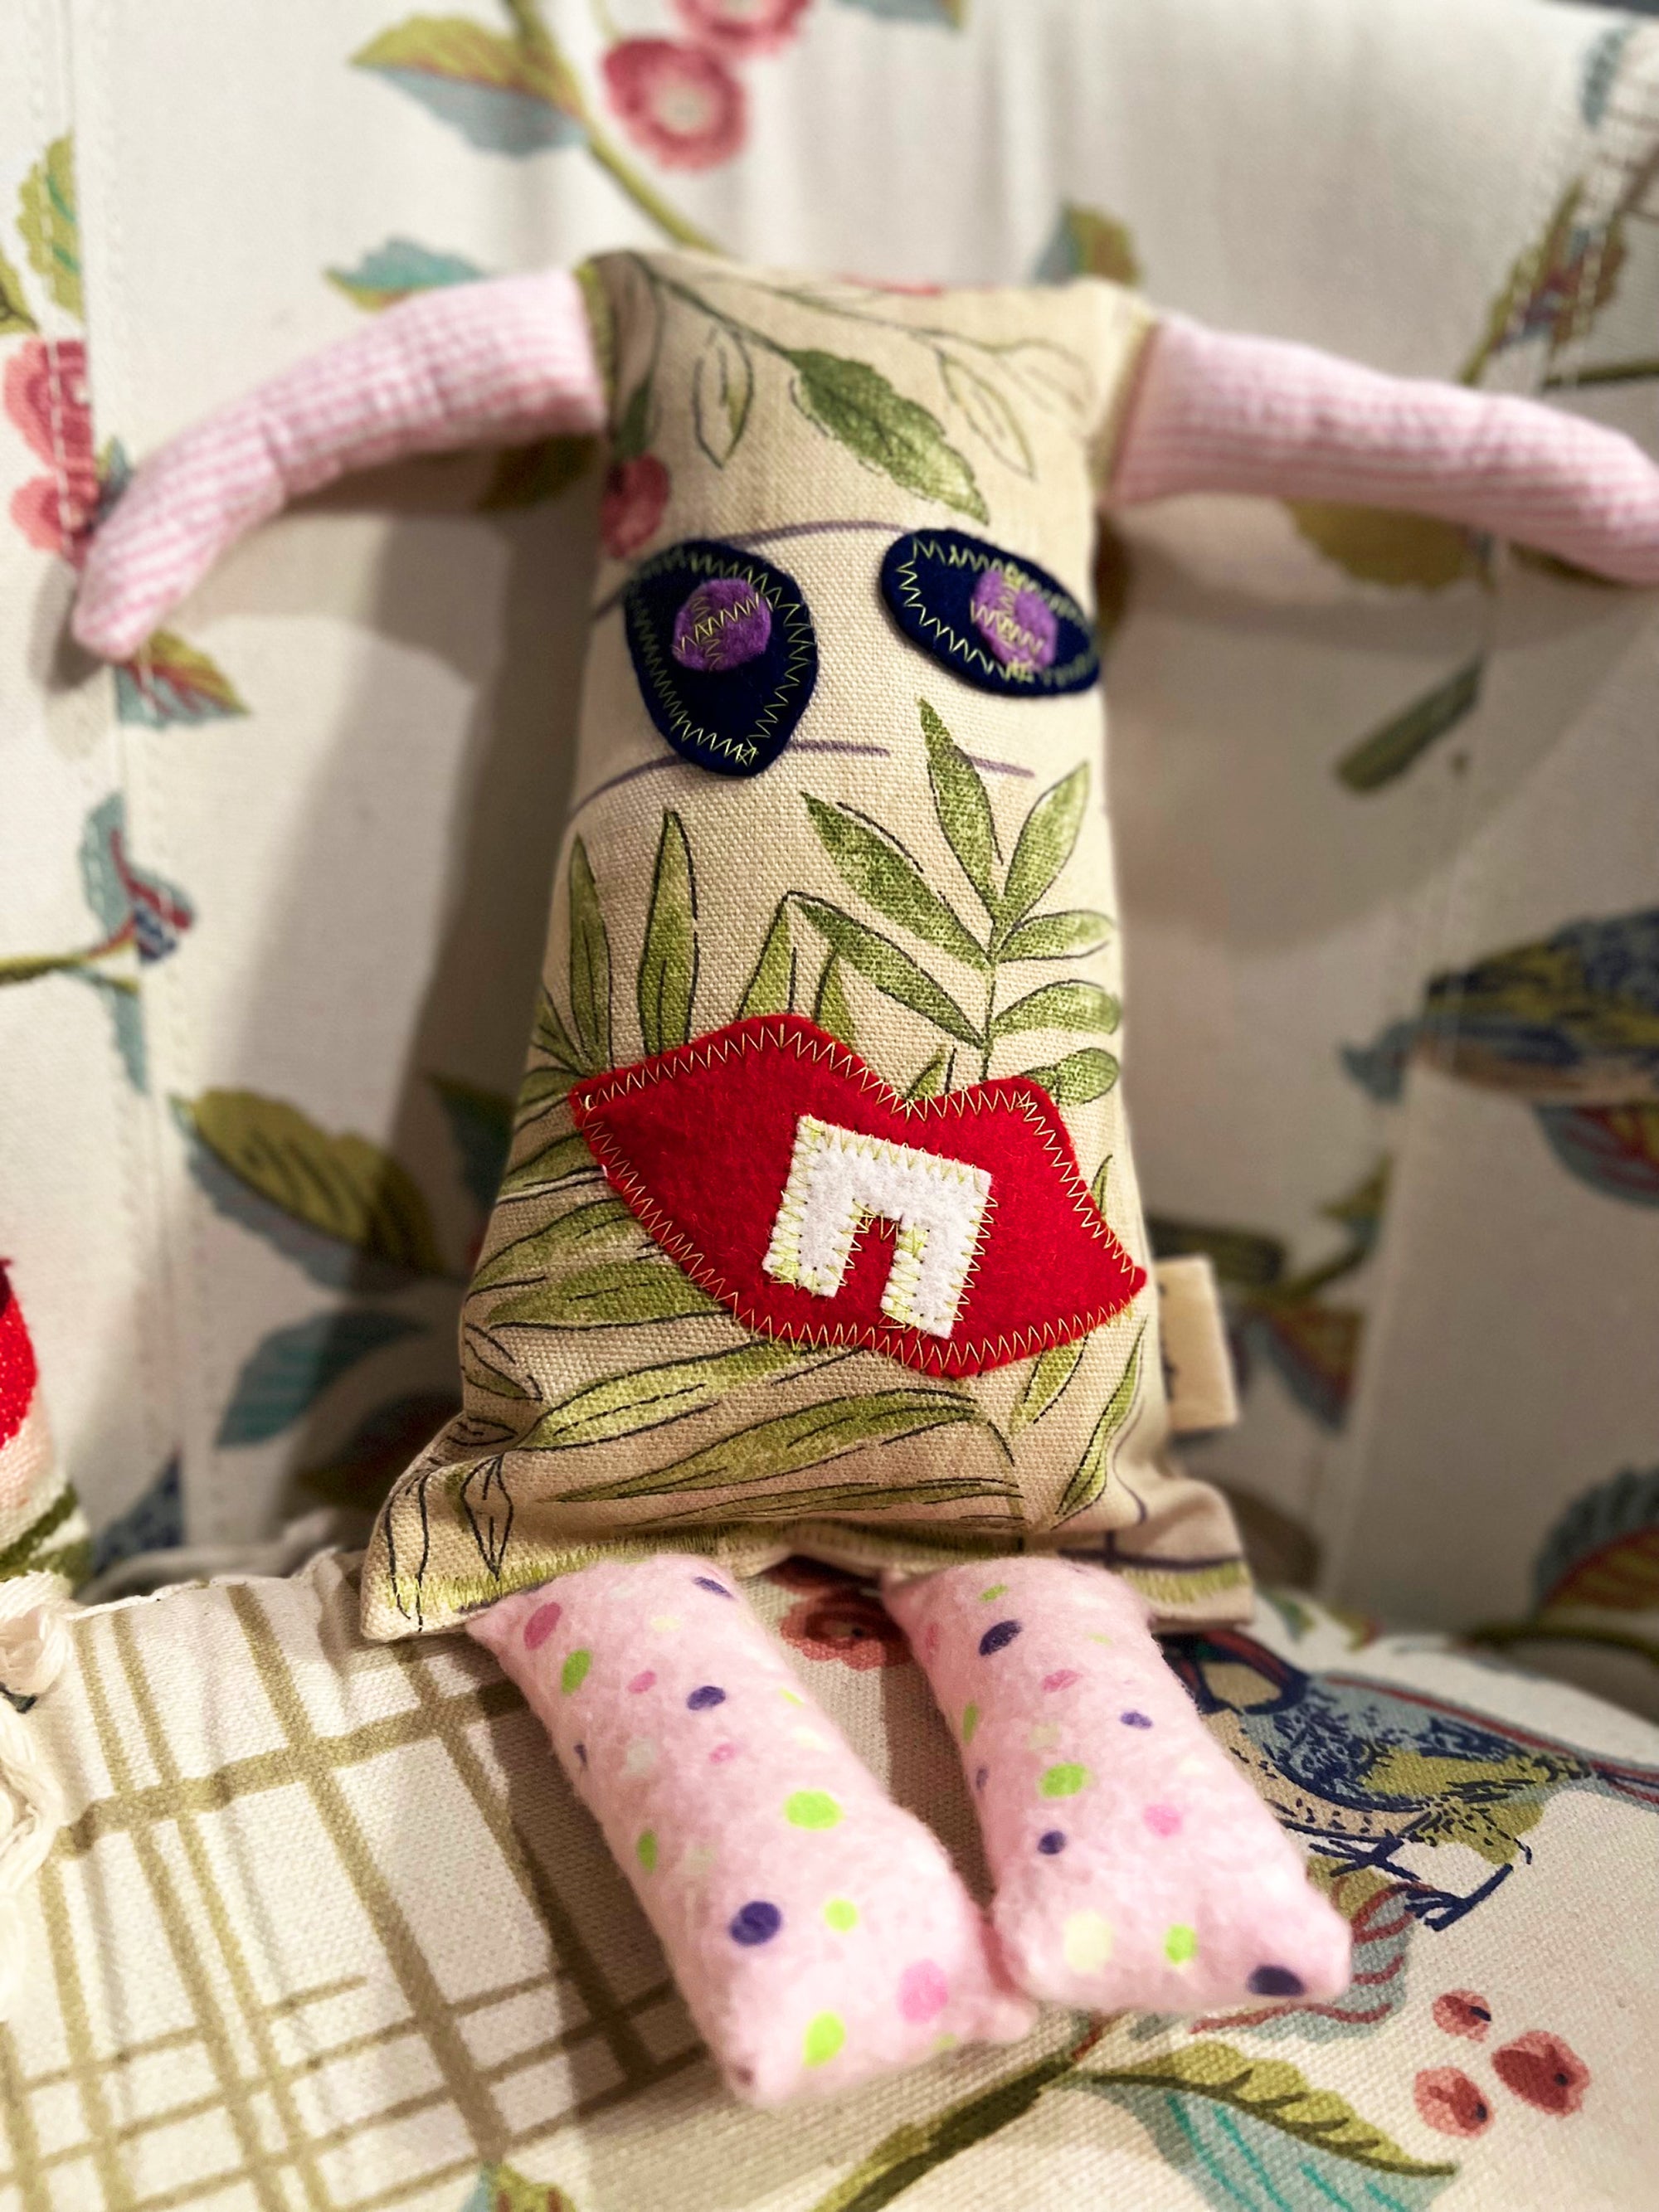 Little Monster "Monica" Handmade Recycled Fabric Plush Toy Doll